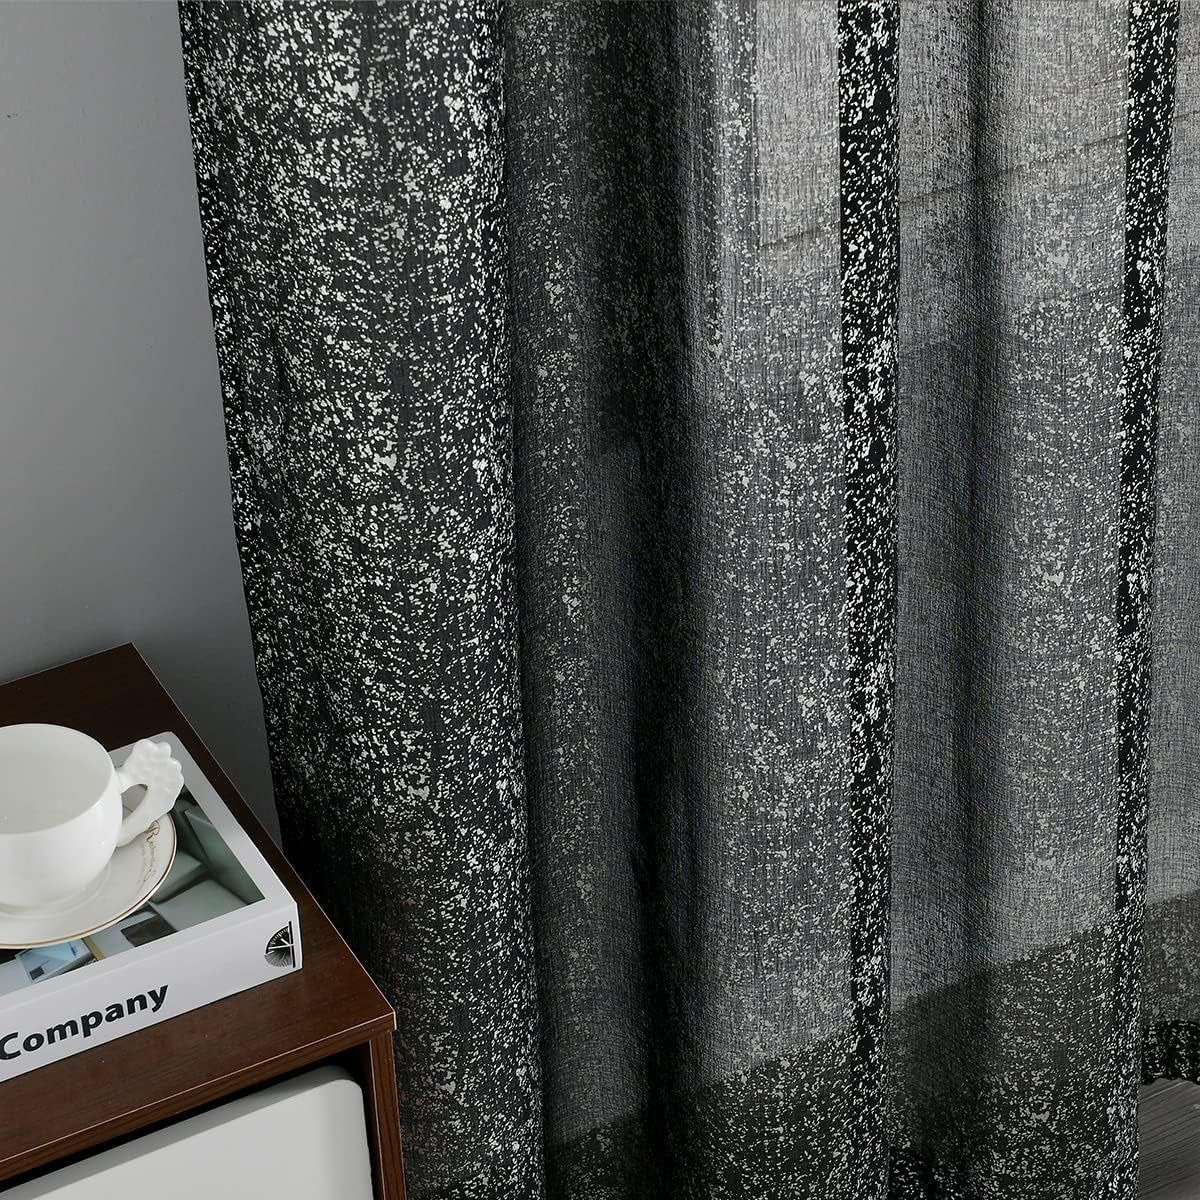 Silver Sheer Curtains 84 Inch Long - Chic Sparkle Curtains for Living Room, Rod Pocket Glitter Sheer Curtains for Windows Privacy Silver Grey Sheer Panels, 52 X 84 Inch, 2 Panels, Silver Gray  TERLYTEX Black Silver W52 X L72 Inch|Pair 